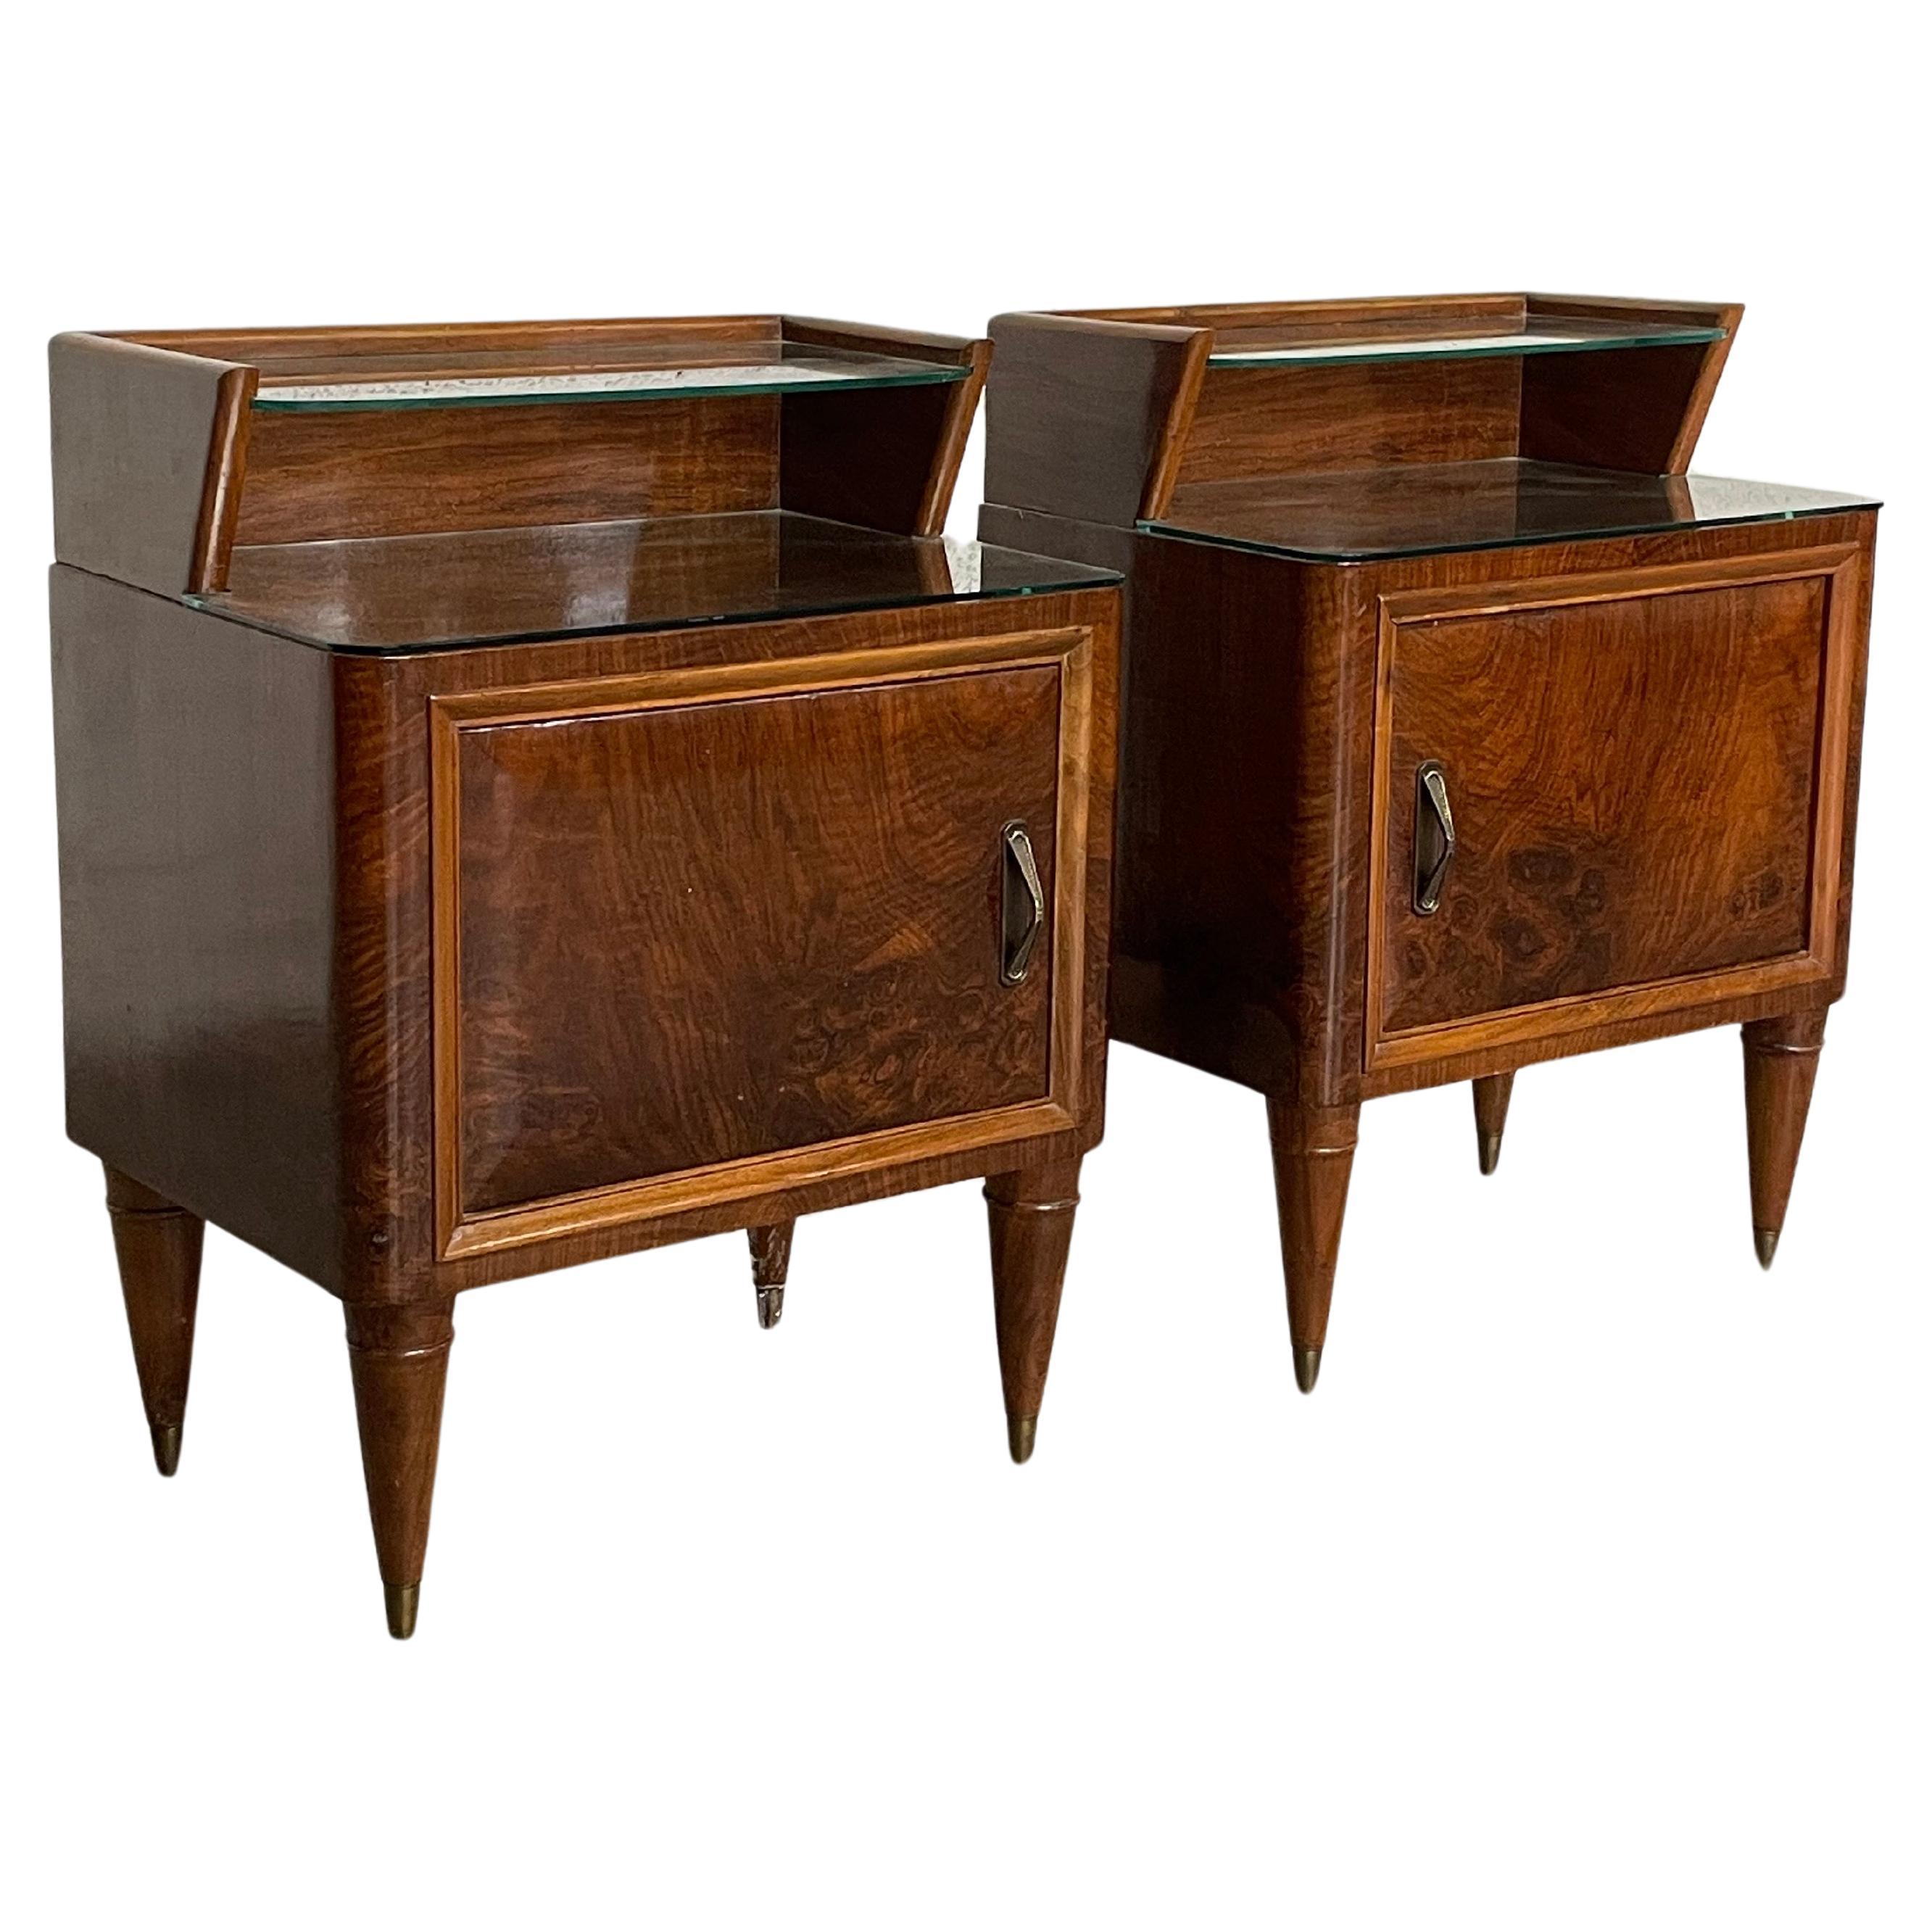 Pair of mahogany and glass bedside tables from the 1950s